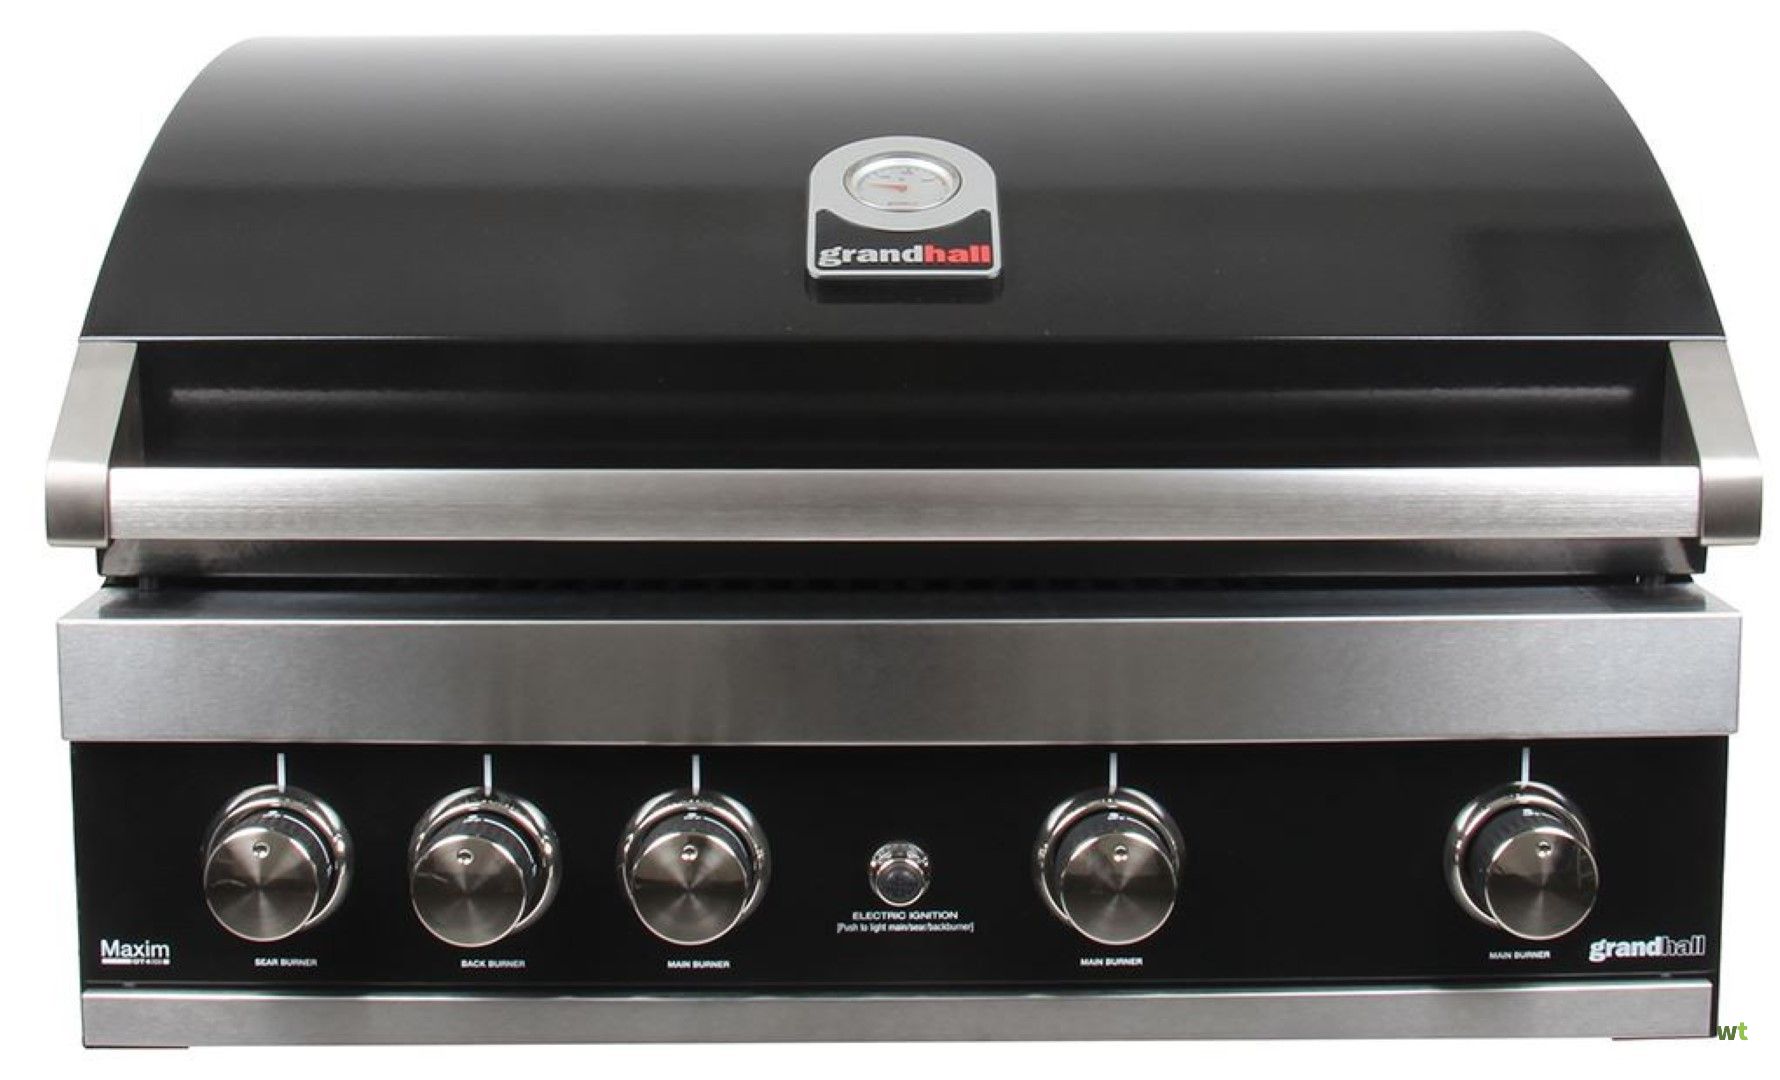 Maxim built-in gas barbecue Grandhall